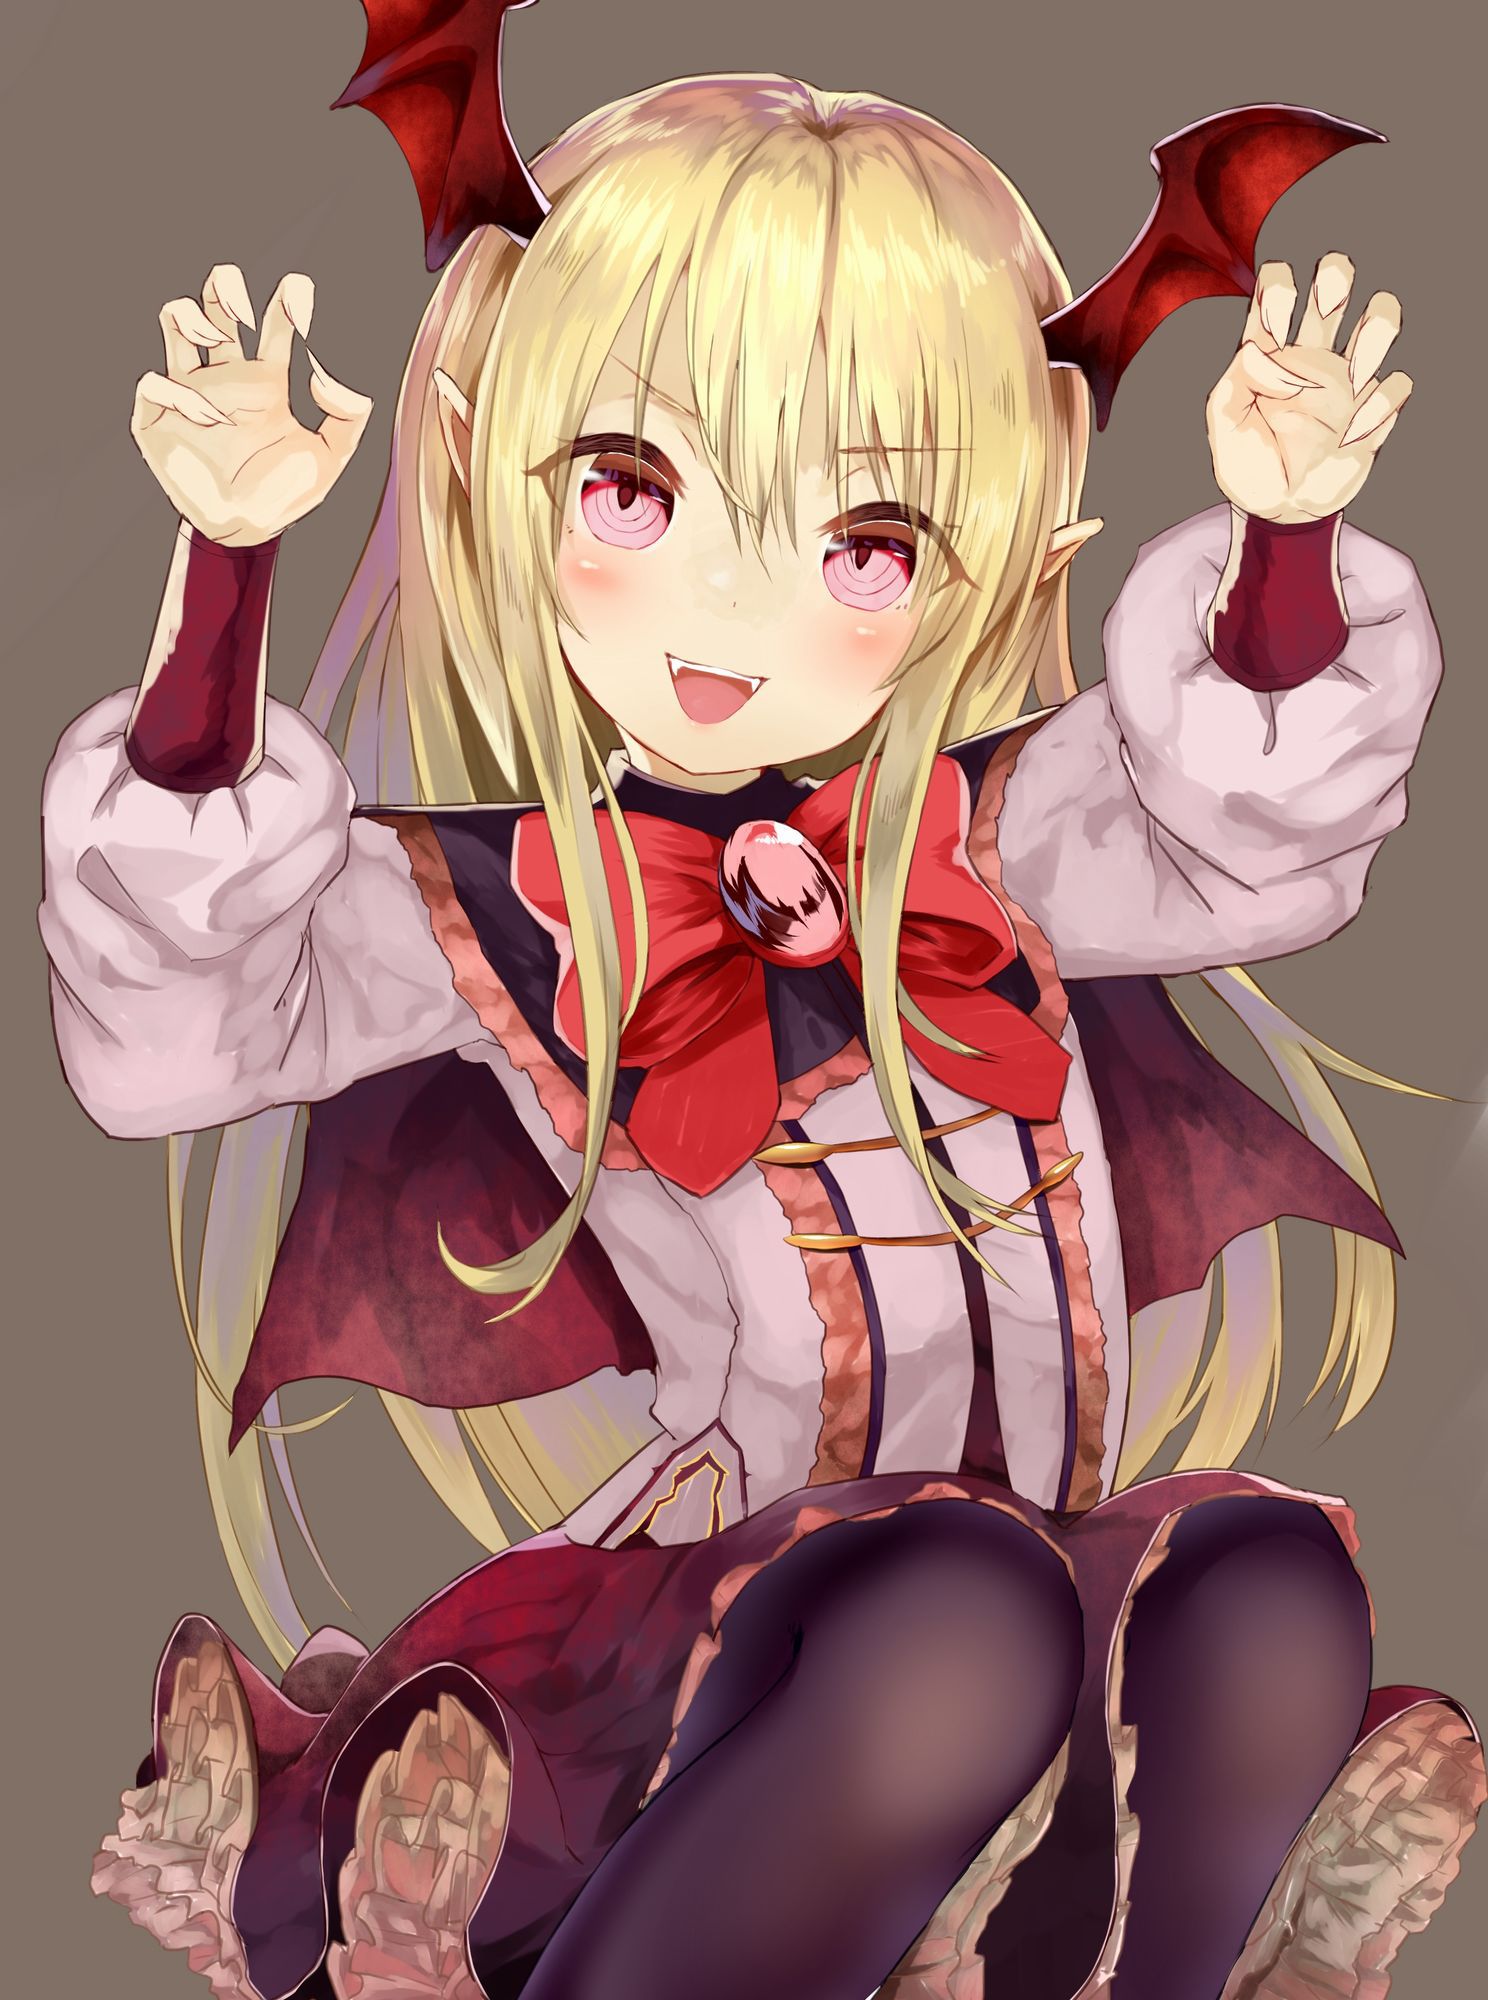 Vampy Chan (secondary-ZIP) to put on the shoes and cute images together "of God bahamut and grumble fantasy." 43